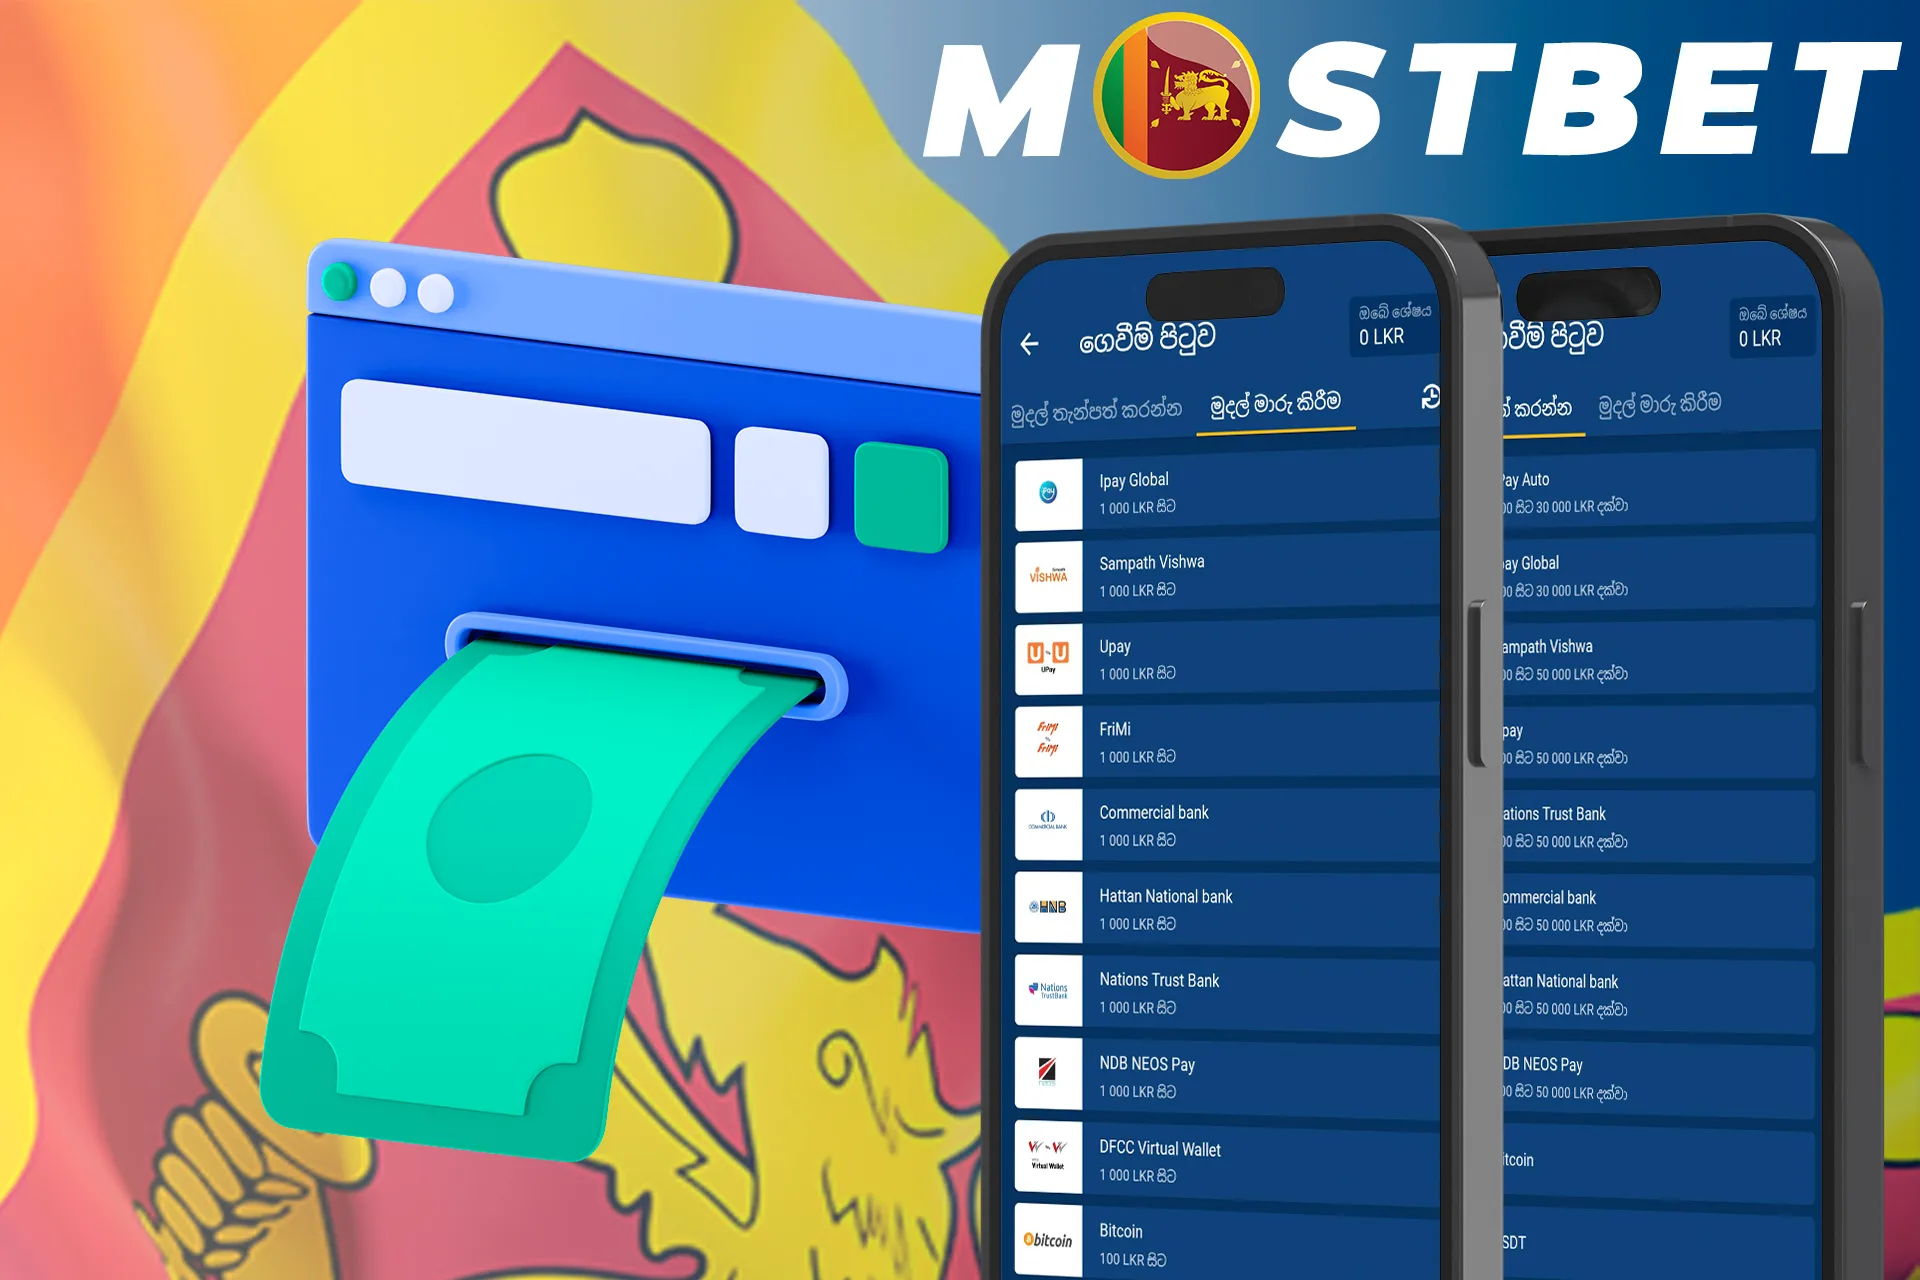 Withdraw your winnings from Mostbet Sri Lanka